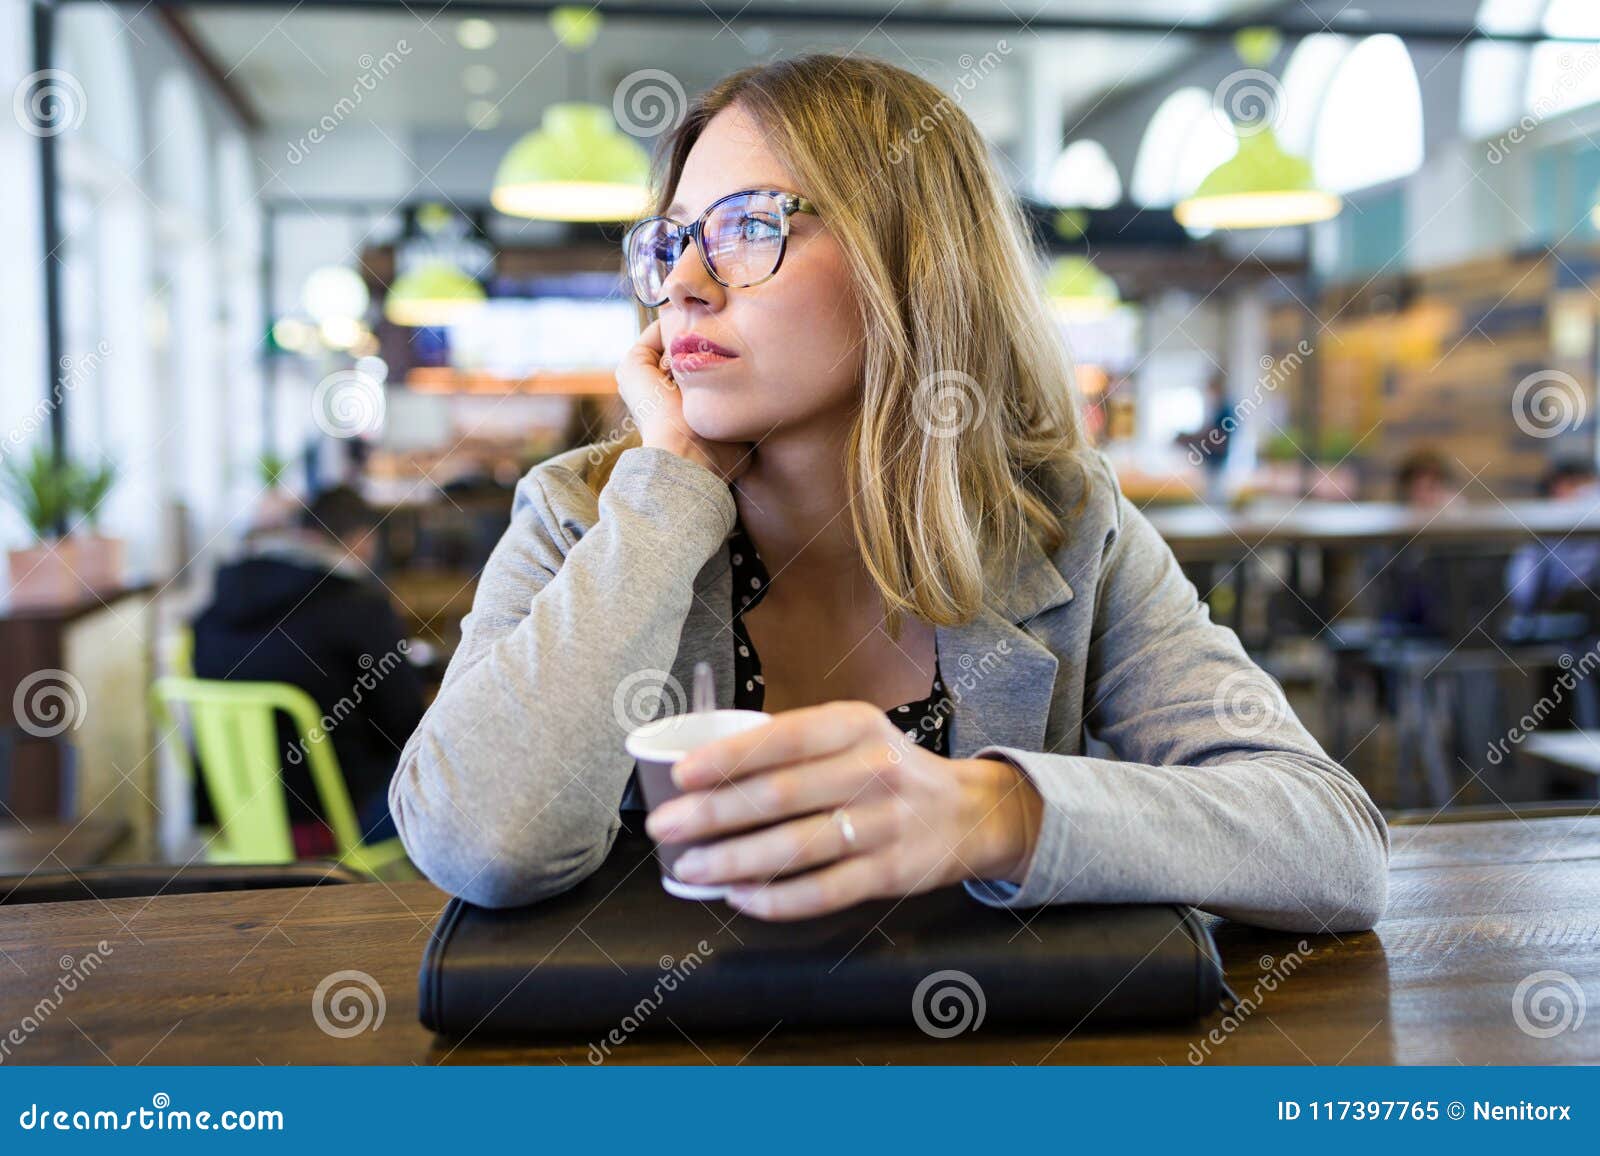 pretty young woman looking sideways while drinking cup of coffee at cafe.